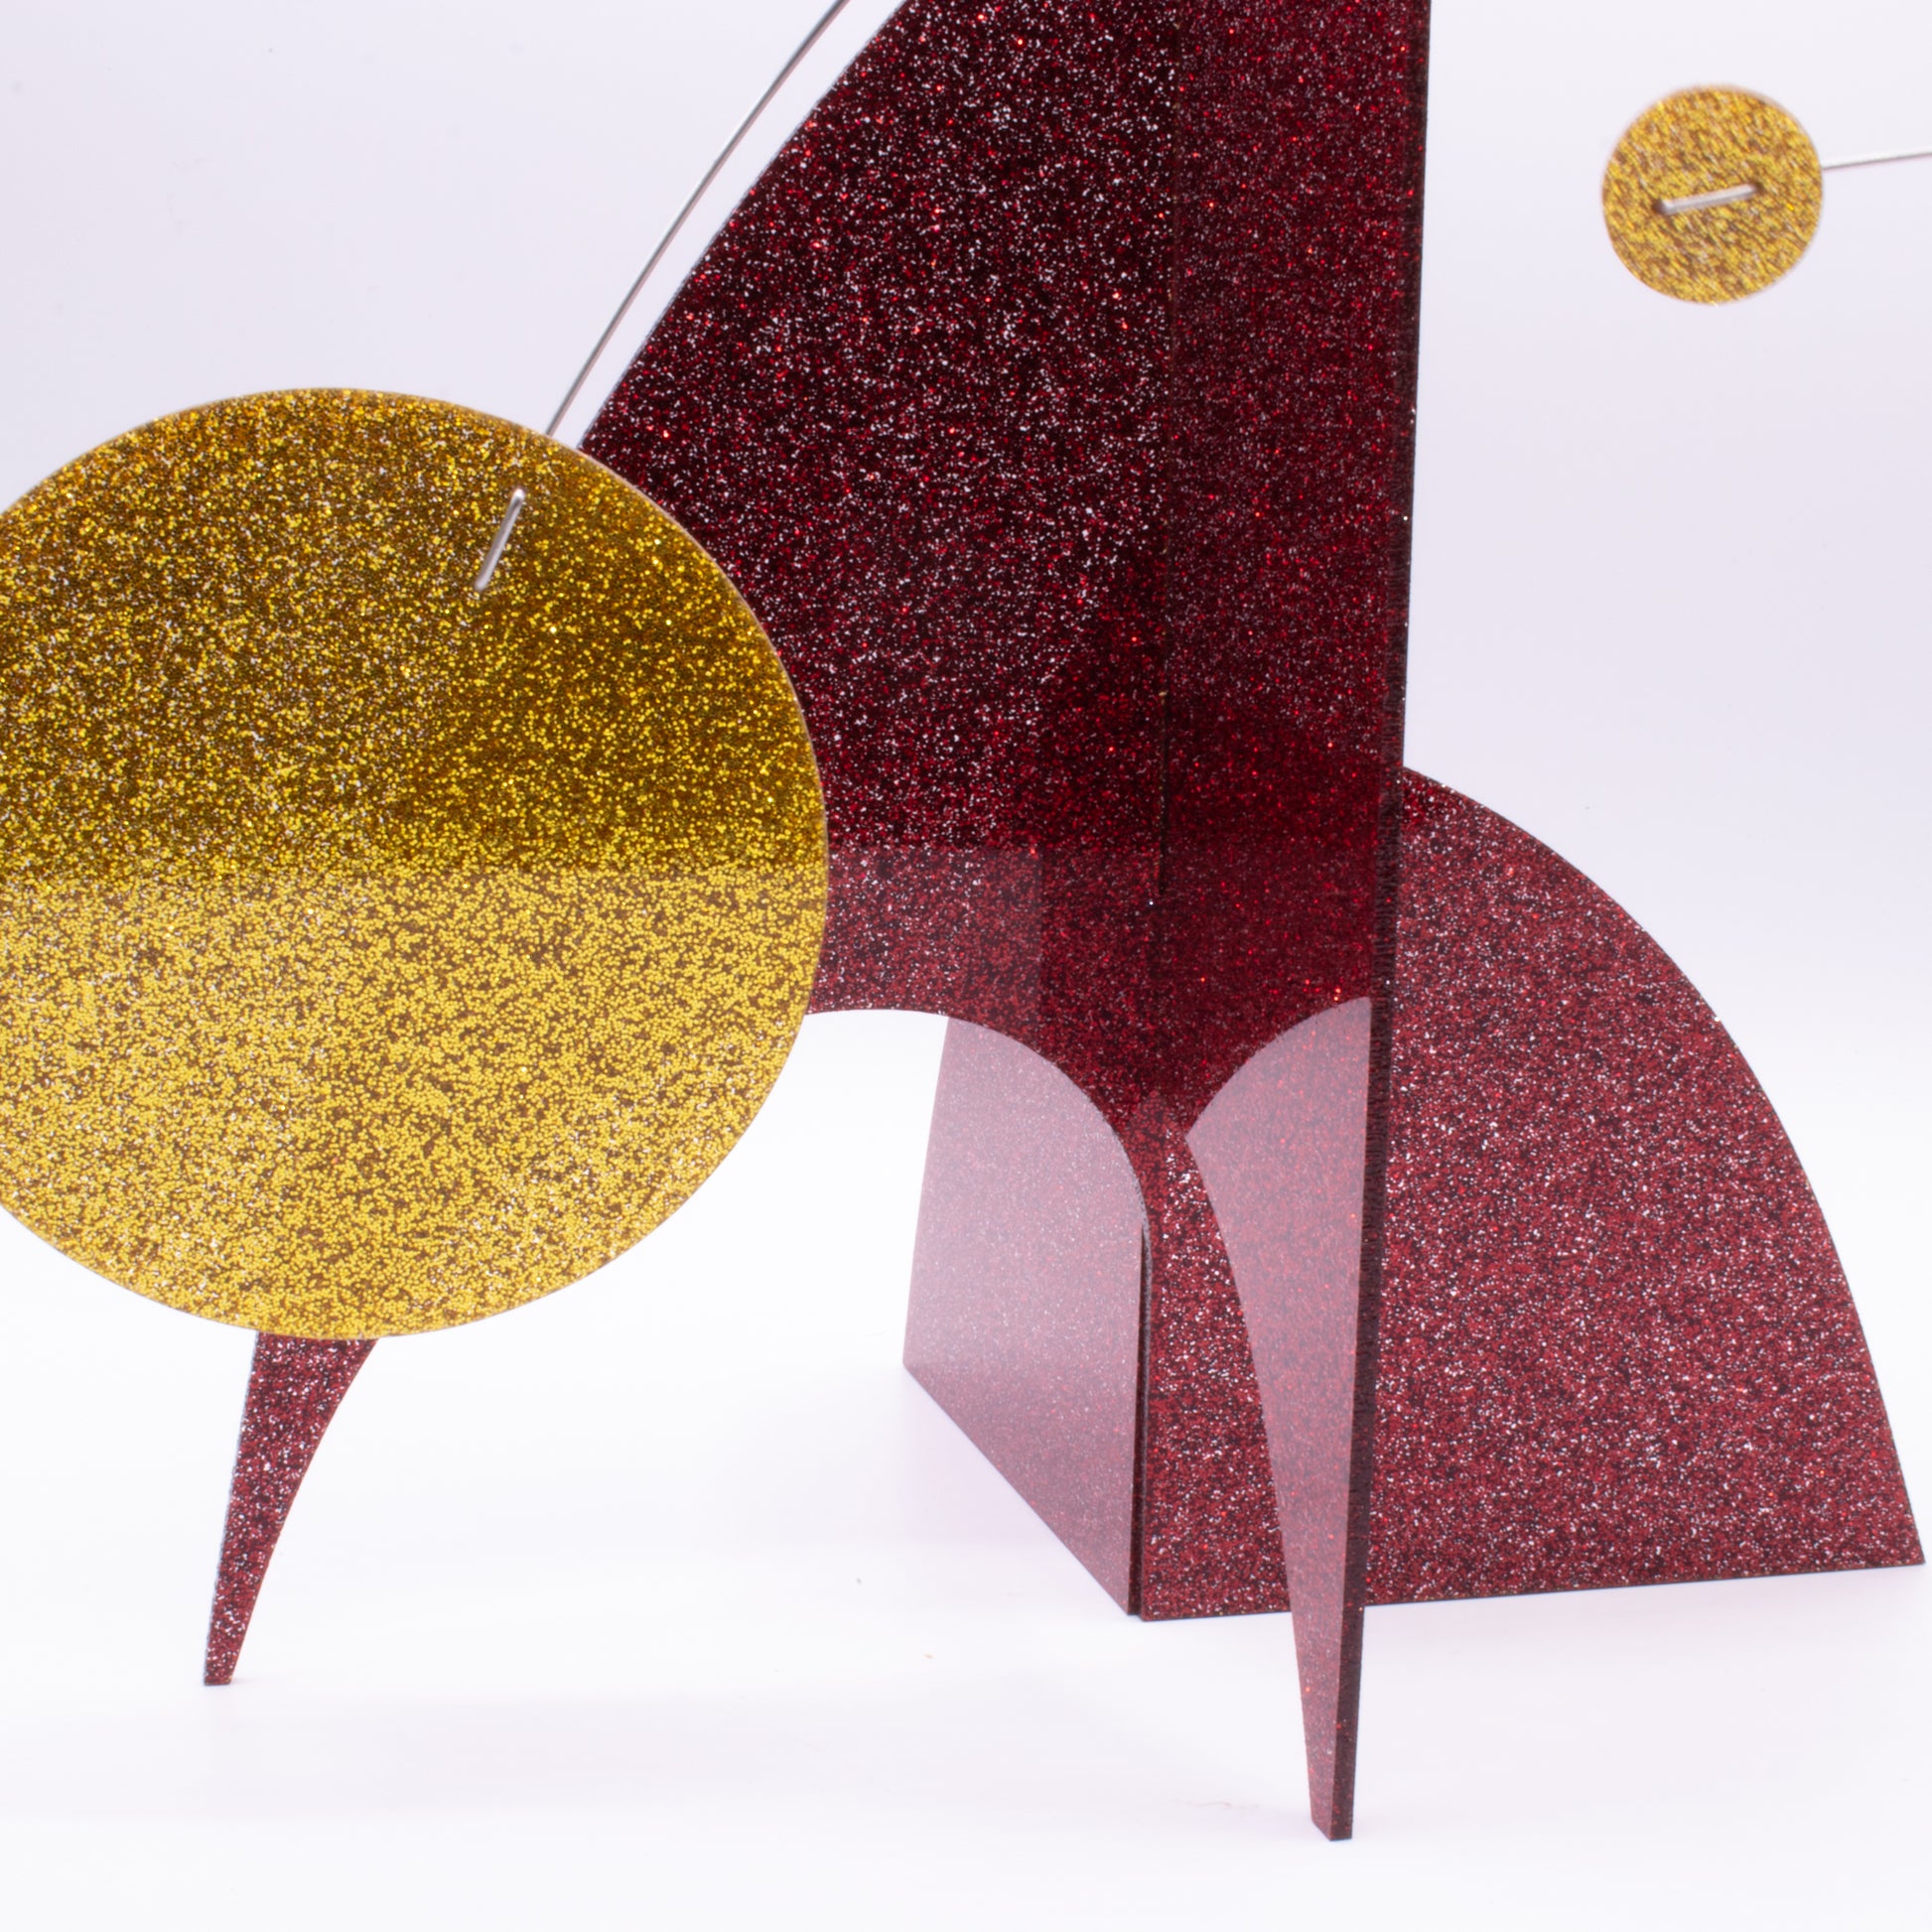 Closeup of Glitter Red and Gold Glitter Christmas Modern Art Stabile Sculpture by AtomicMobiles.com